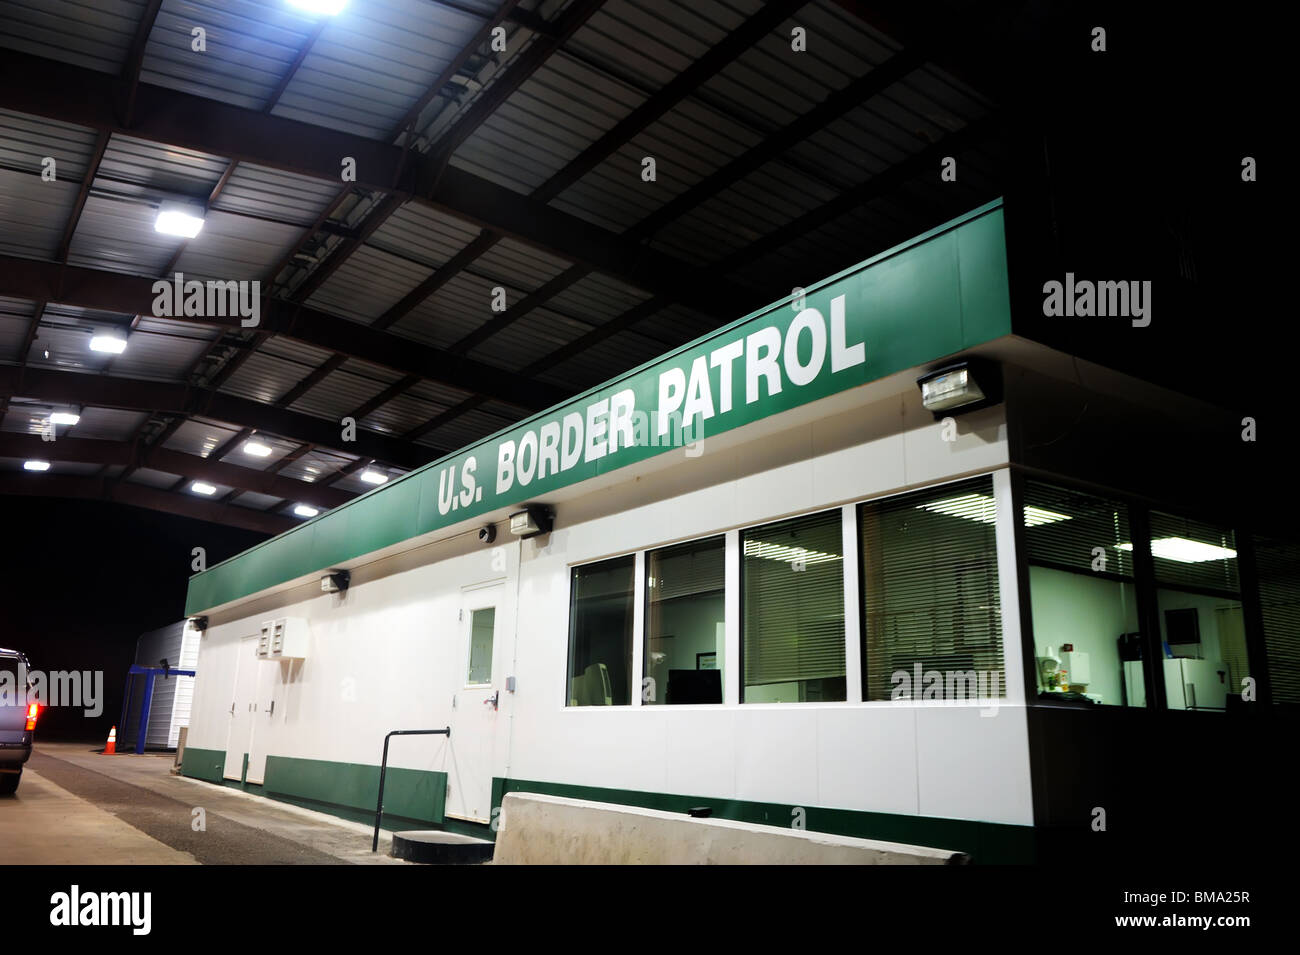 Image of a US border patrol building Stock Photo